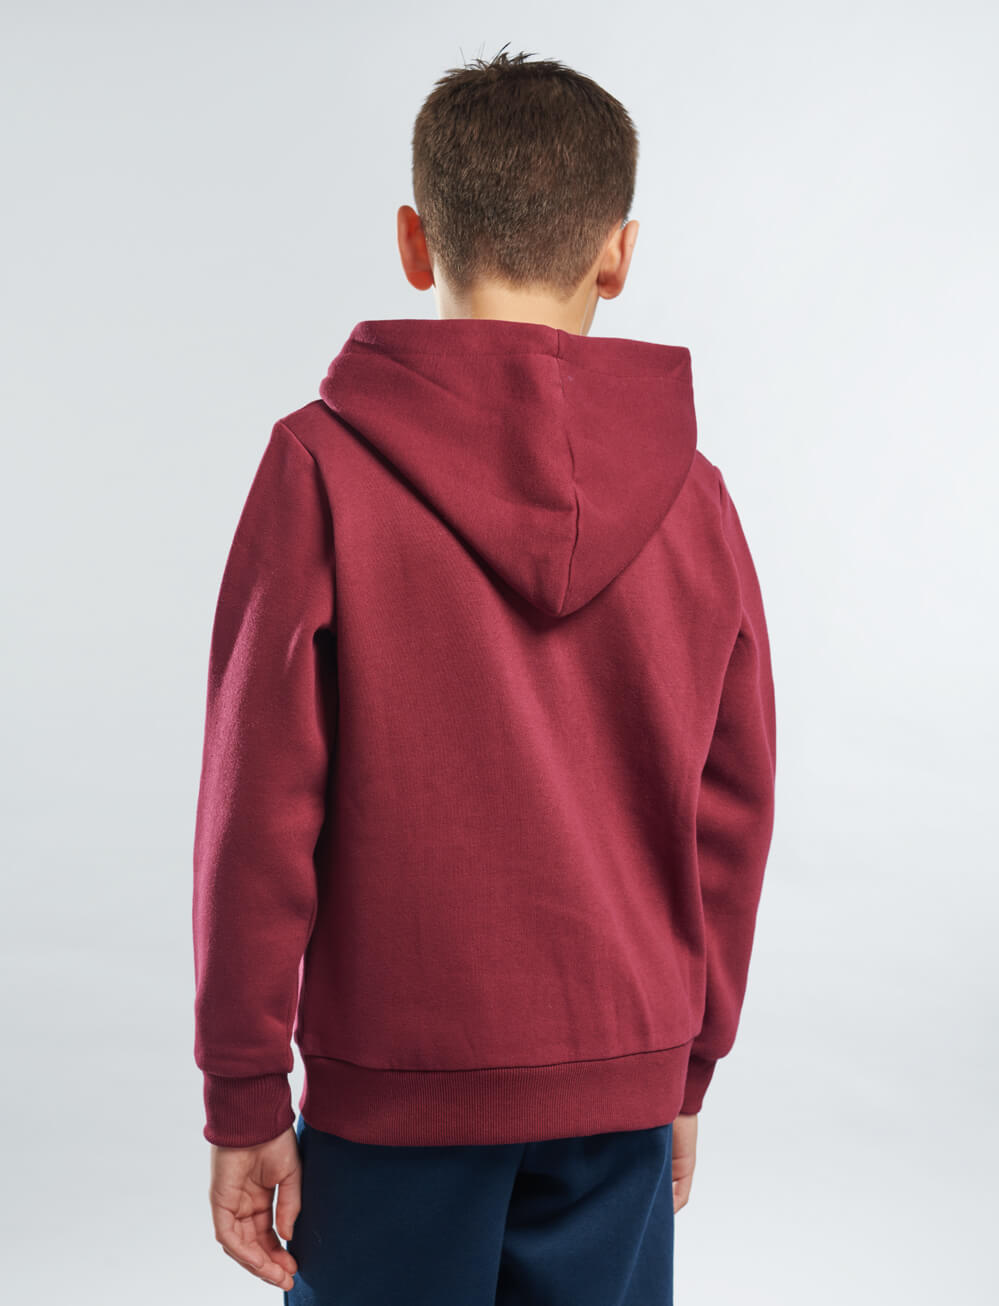 Official West Ham United Kids Crest Hoodie - Claret - The World Football Store